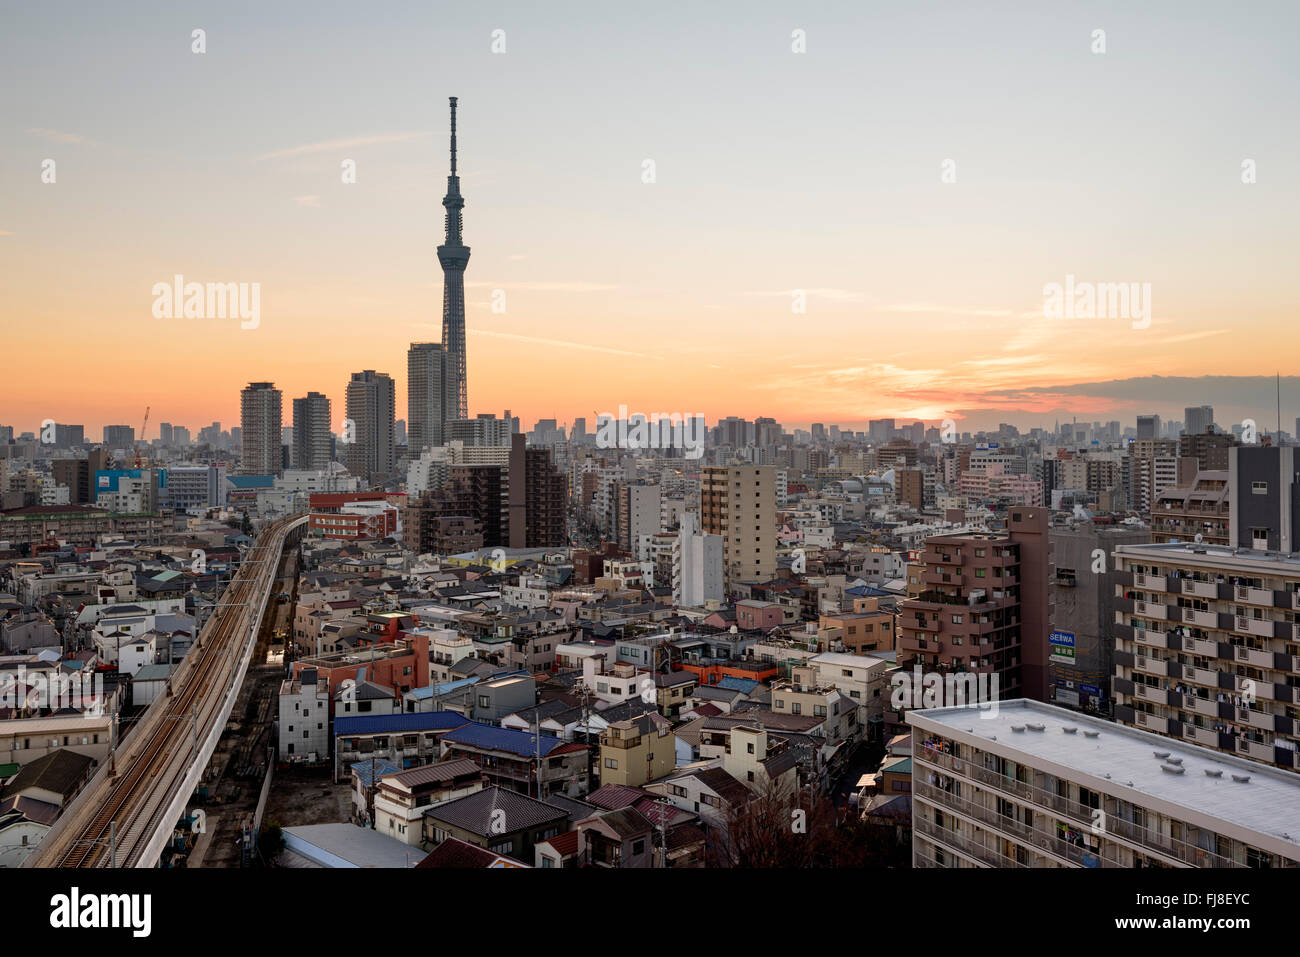 Tokyo; Japan -January 9; 2016: Tokyo Skyline at dusk, view of Asakusa district , Skytree visible in the distance. Stock Photo